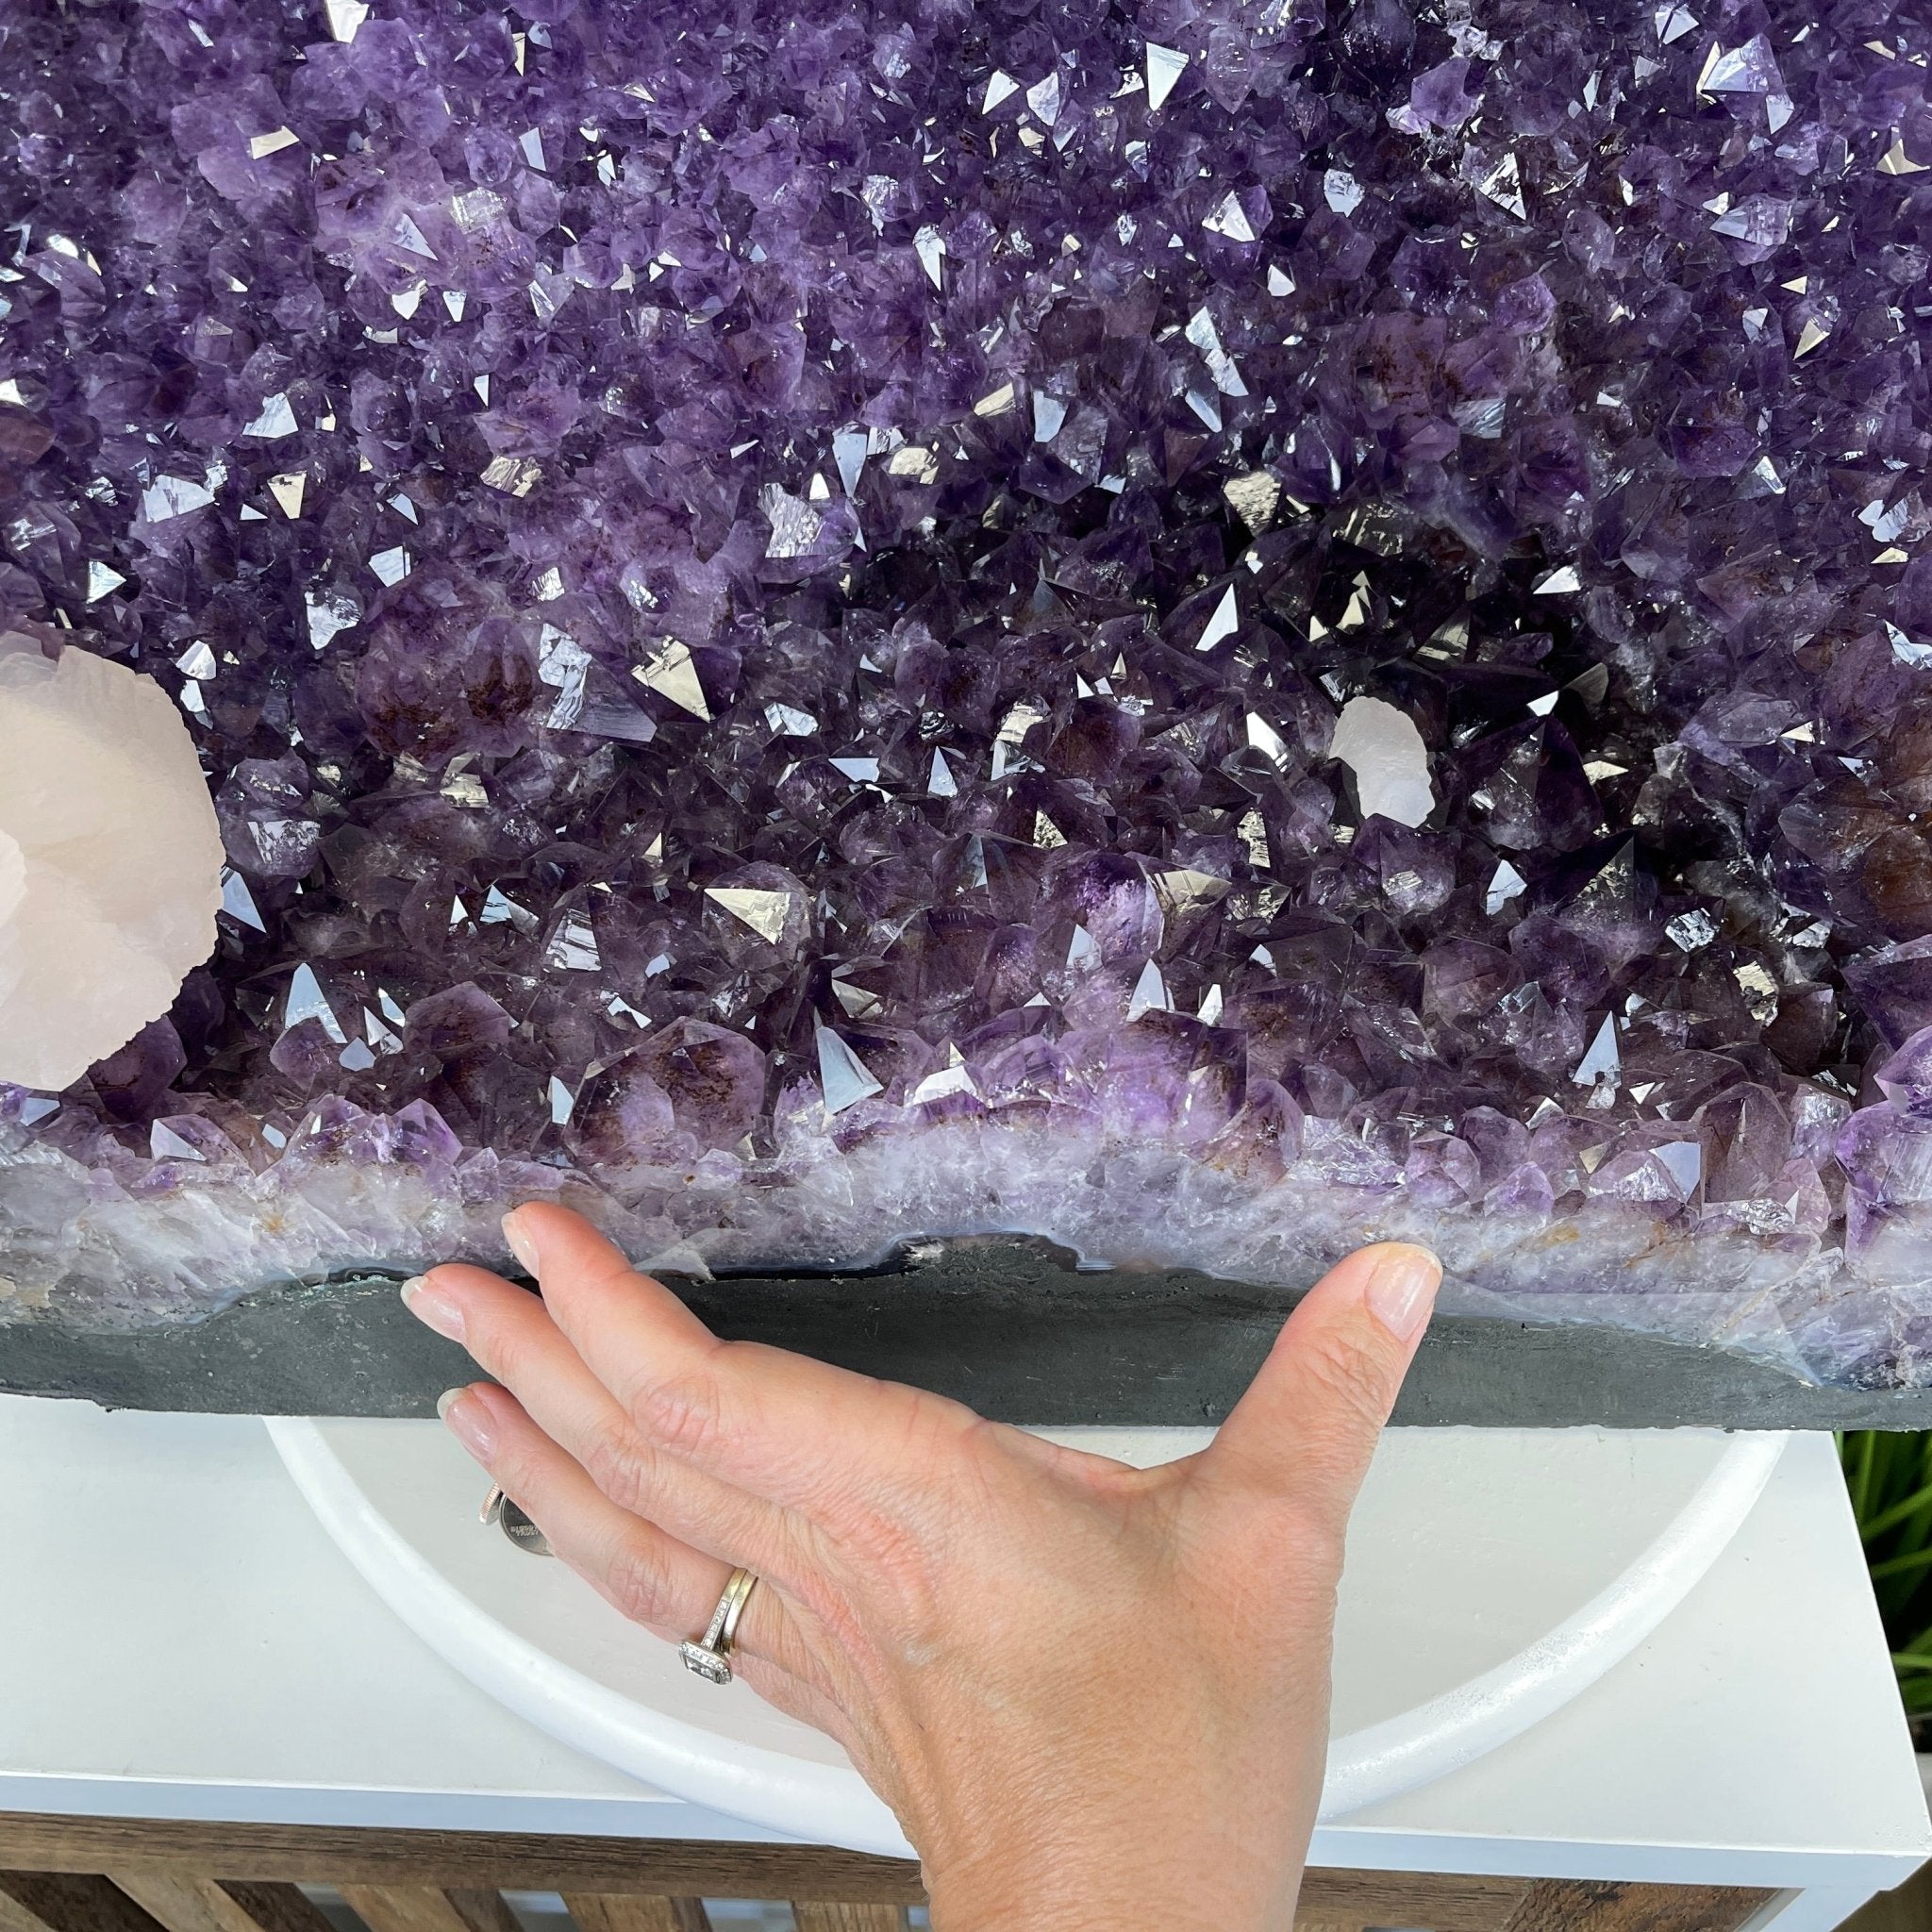 Extra Quality Brazilian Amethyst Cathedral, 102.8 lbs & 17" Tall #5601-0613 by Brazil Gems - Brazil GemsBrazil GemsExtra Quality Brazilian Amethyst Cathedral, 102.8 lbs & 17" Tall #5601-0613 by Brazil GemsCathedrals5601-0613